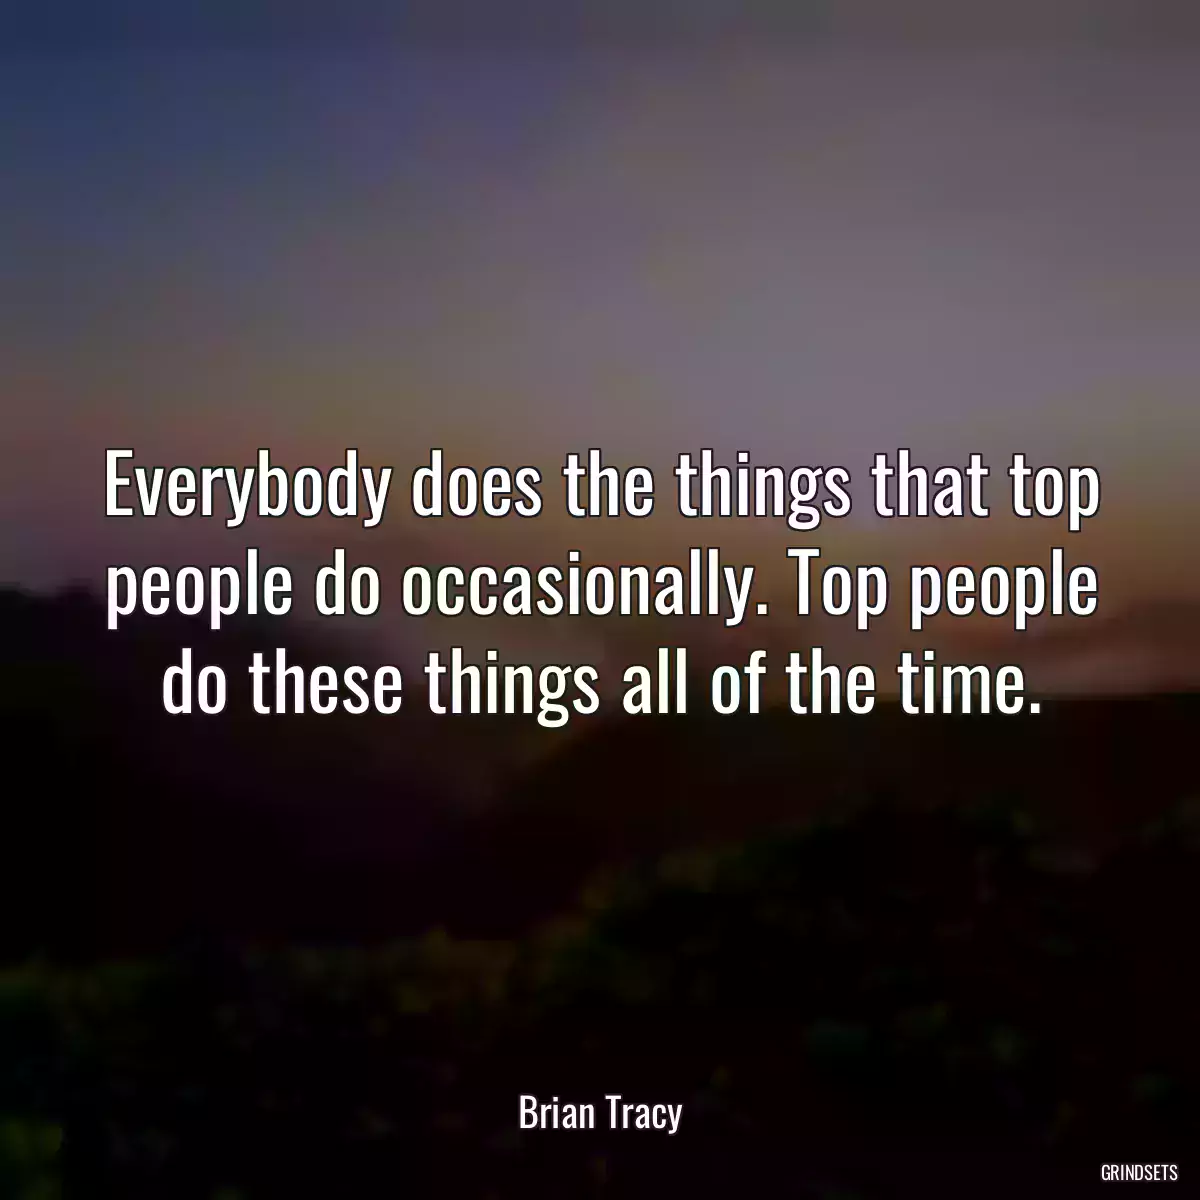 Everybody does the things that top people do occasionally. Top people do these things all of the time.